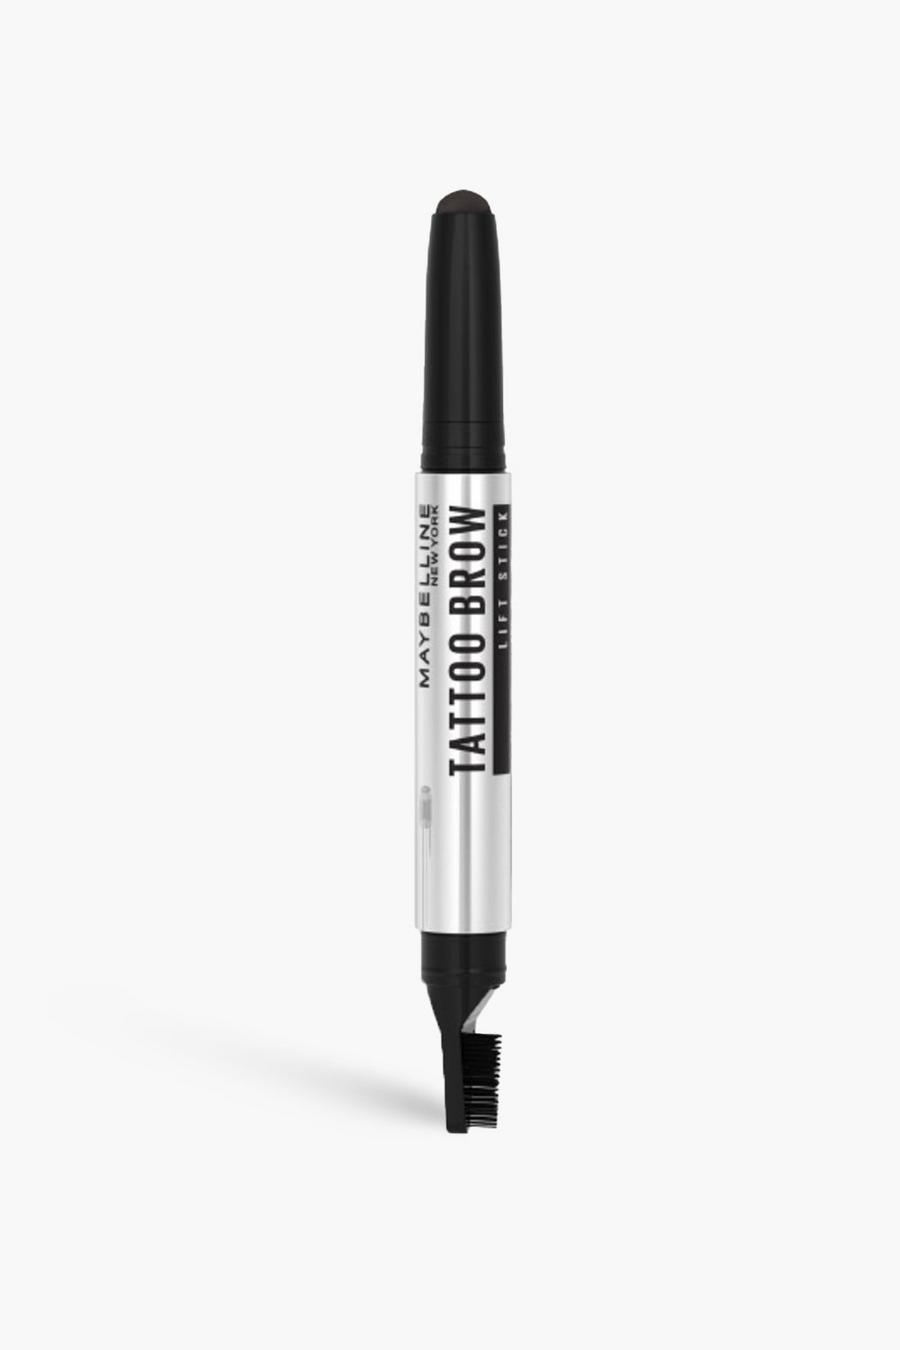 Maybelline - Stick à double embout pour sourcils Tattoo Brow Lift, 5 warm black brown